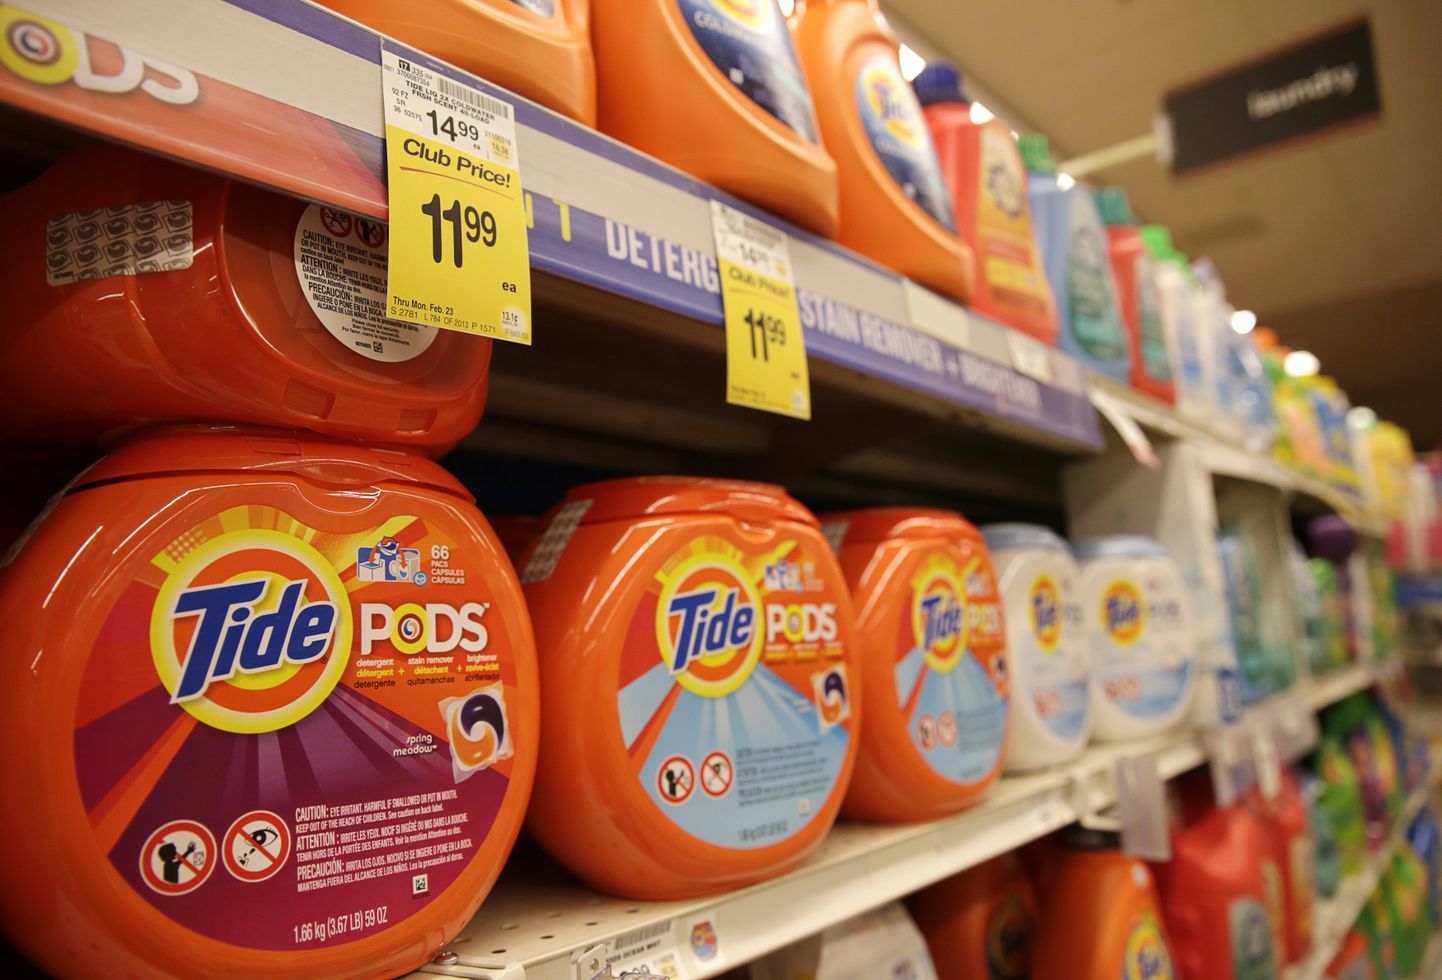 Tide detergent pods from Procter & Gamble are seen at a grocery store in Wheaton, Maryland, in this file photo taken February 13, 2015. Procter & Gamble, the world's largest consumer products maker, reported its sixth straight fall in quarterly sales, as the stronger dollar continued to weigh on the value of sales from overseas markets.     REUTERS/Gary Cameron/Files